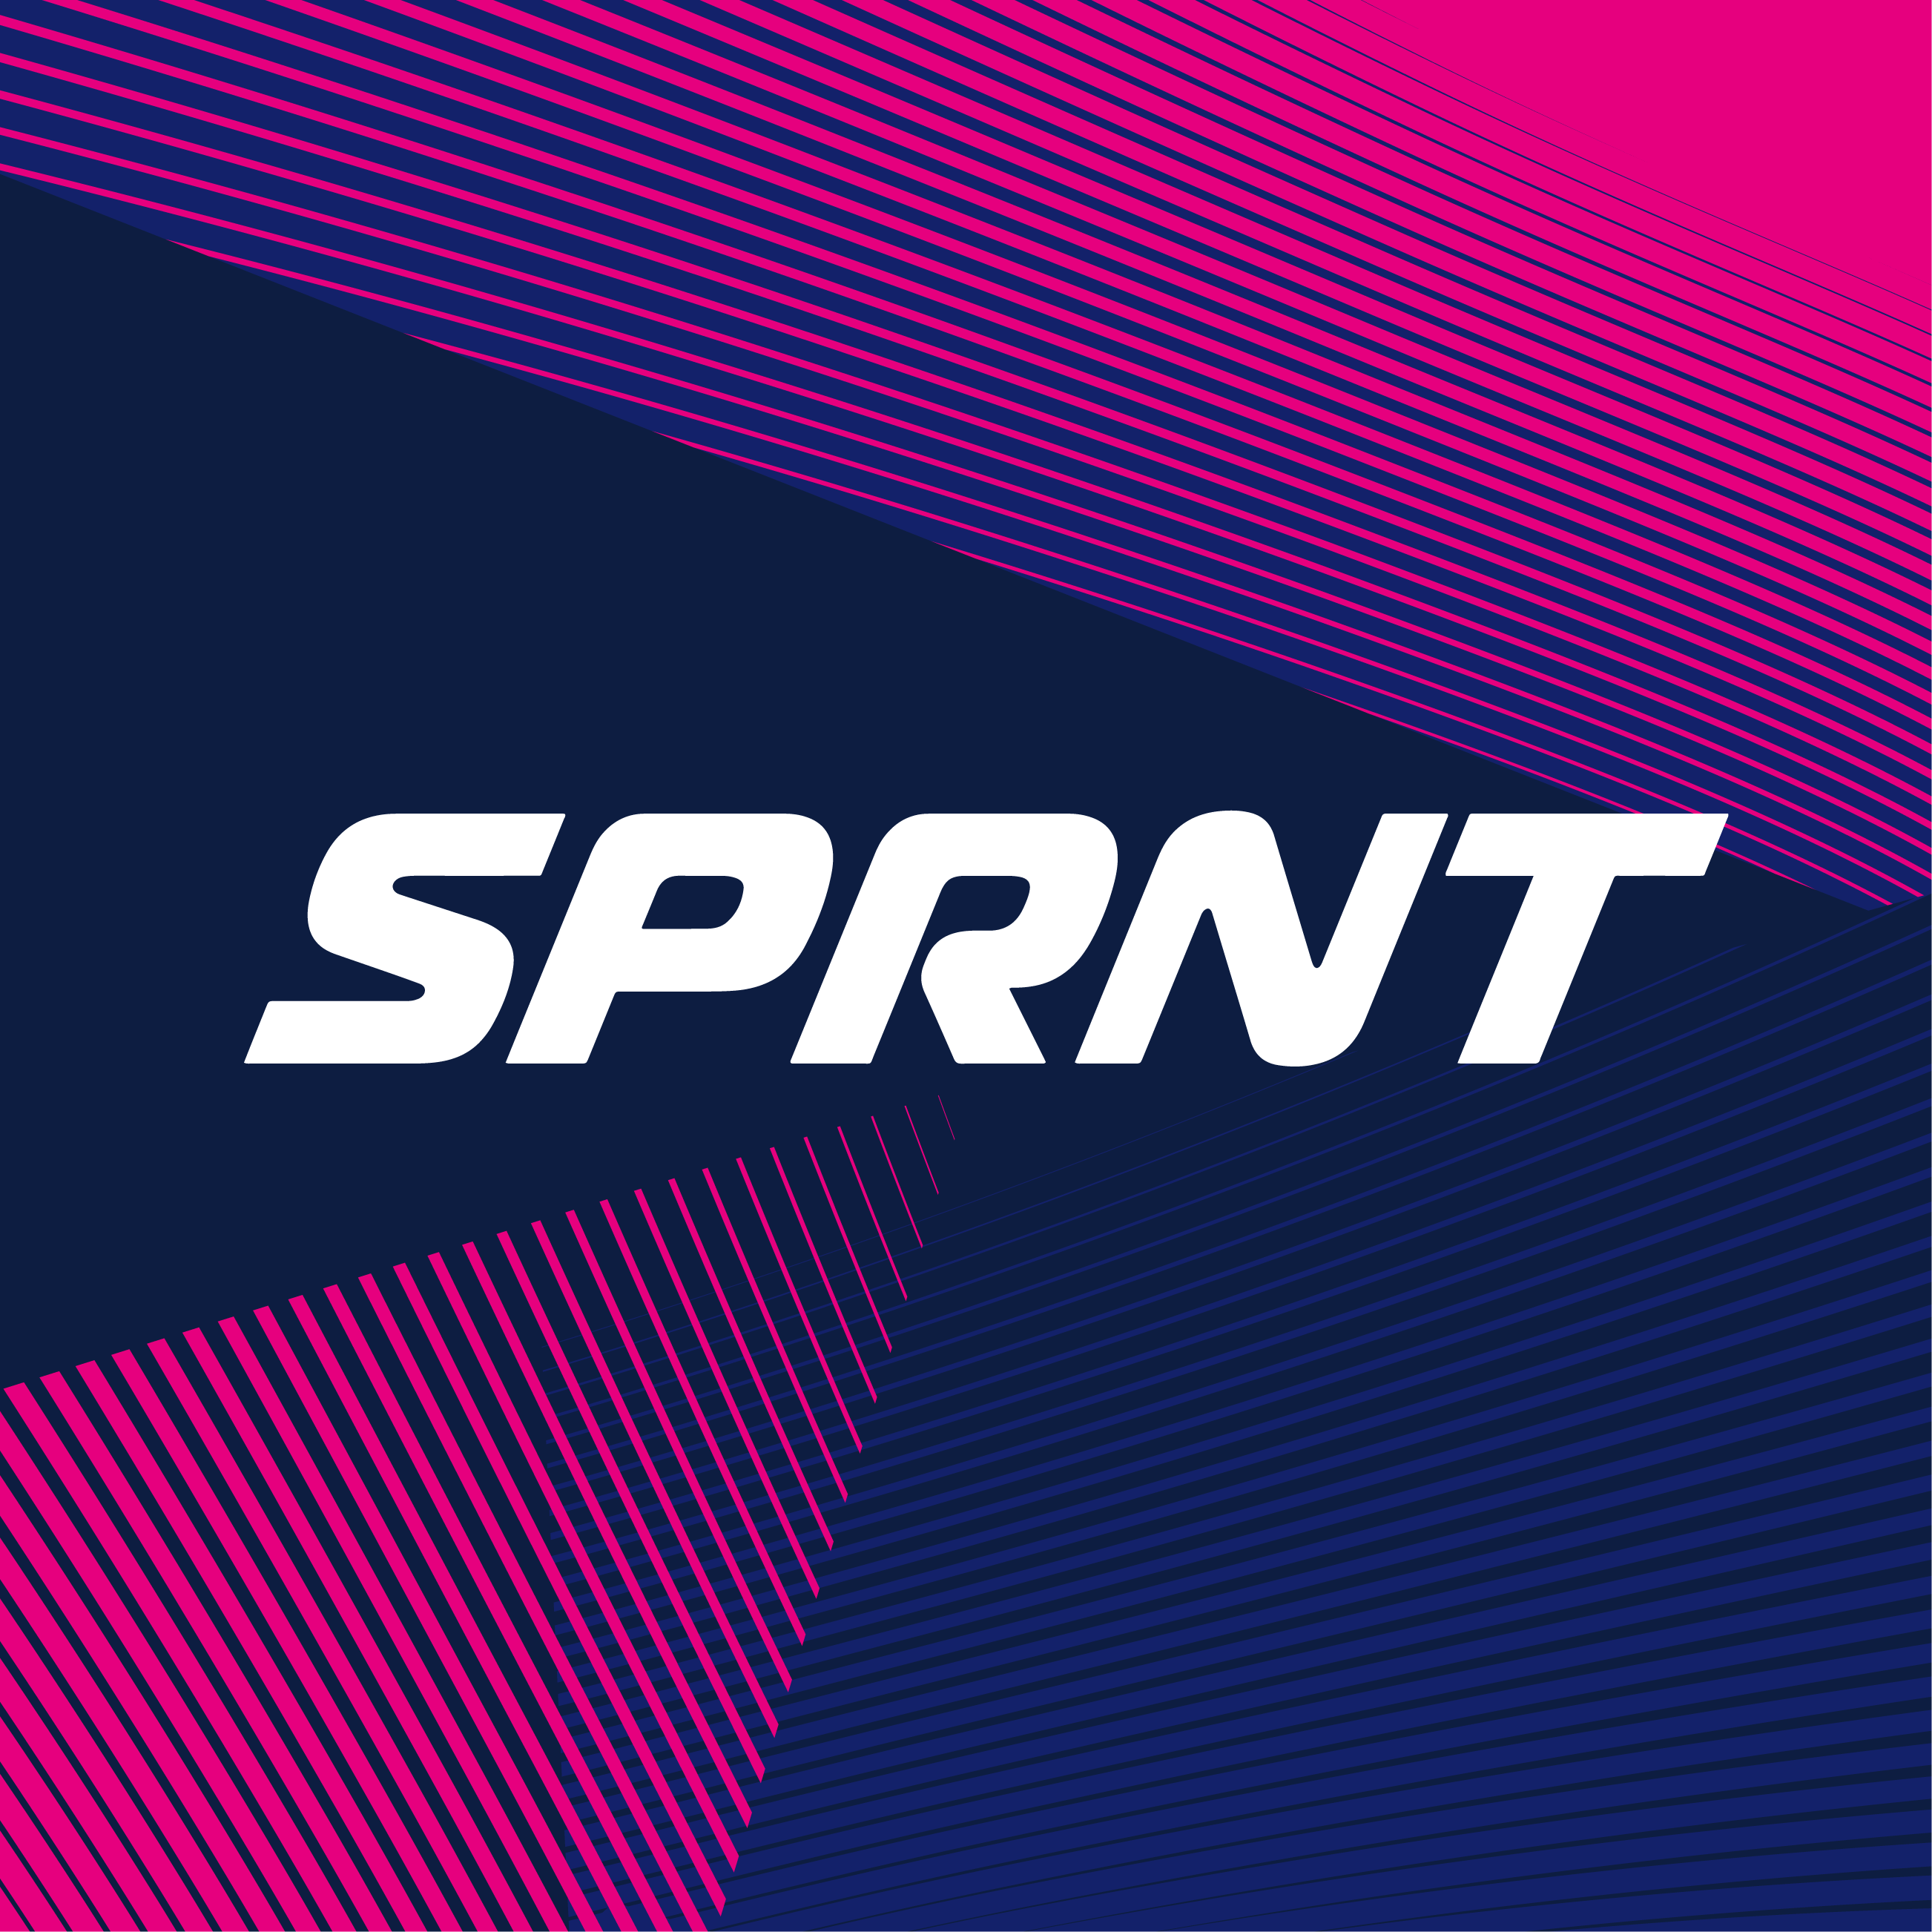 Club Image for SPRNT